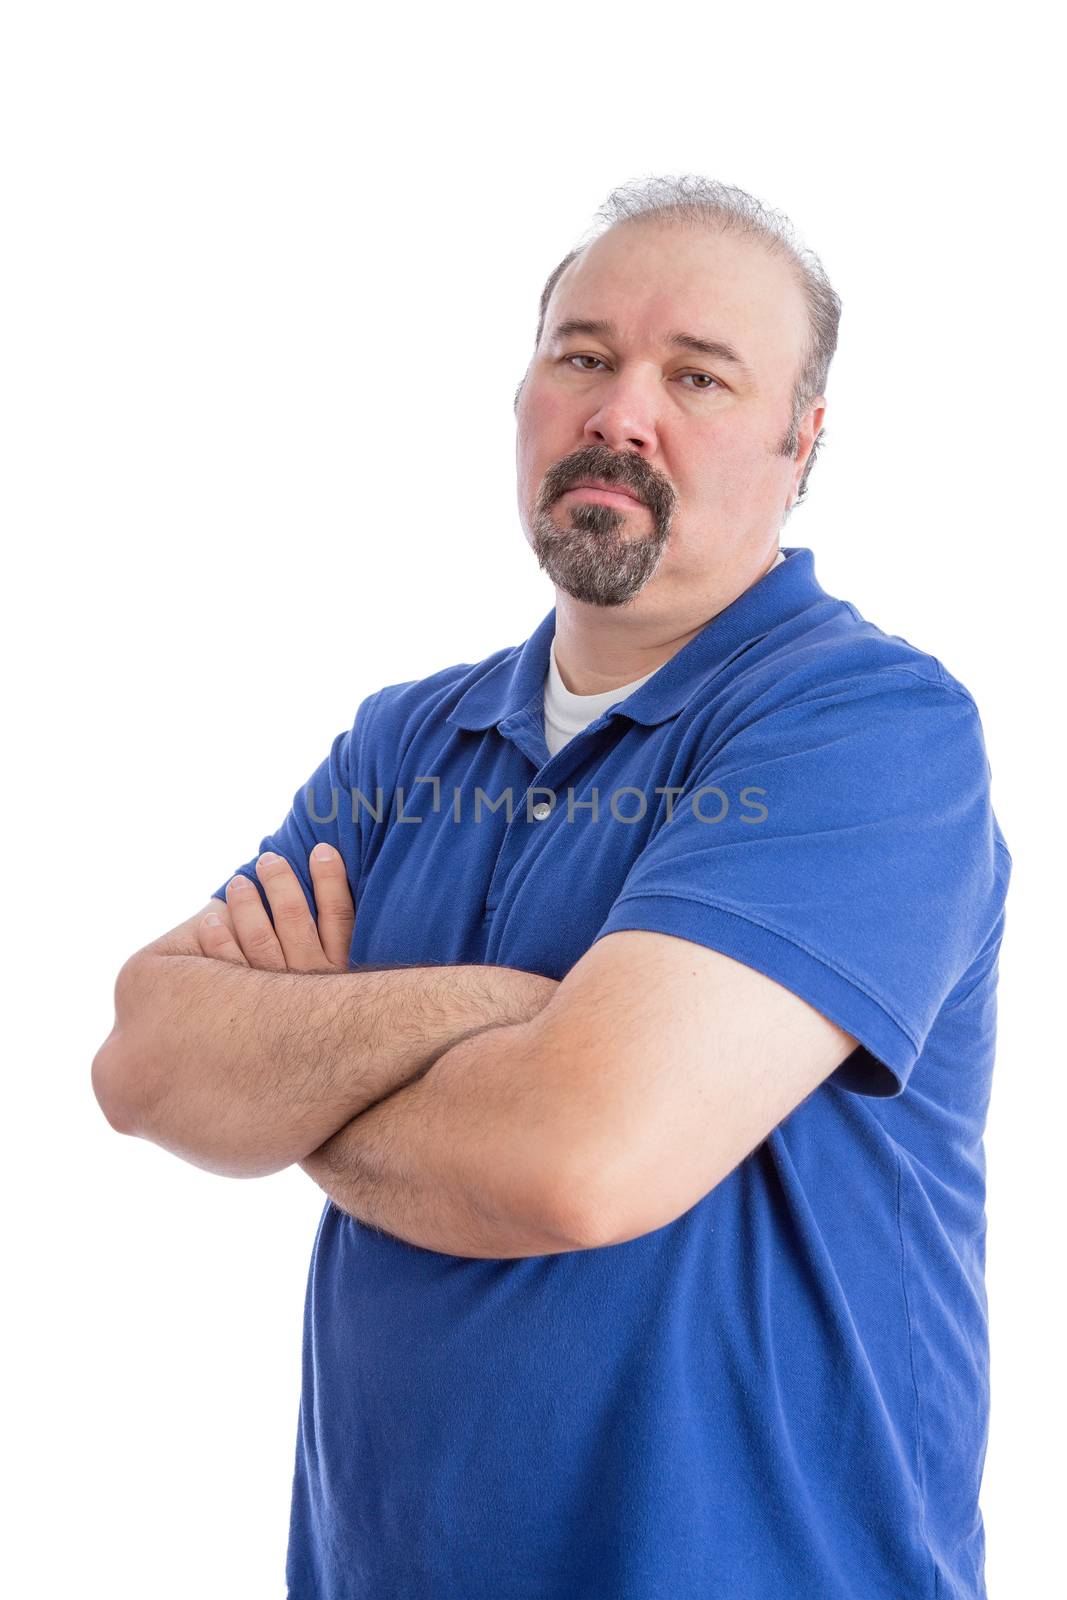 Portrait of a Serious Bearded Man in Blue Polo Shirt, Crossing his Arms and Looking at the Camera in an Aggressive Look. Isolated on White Background.